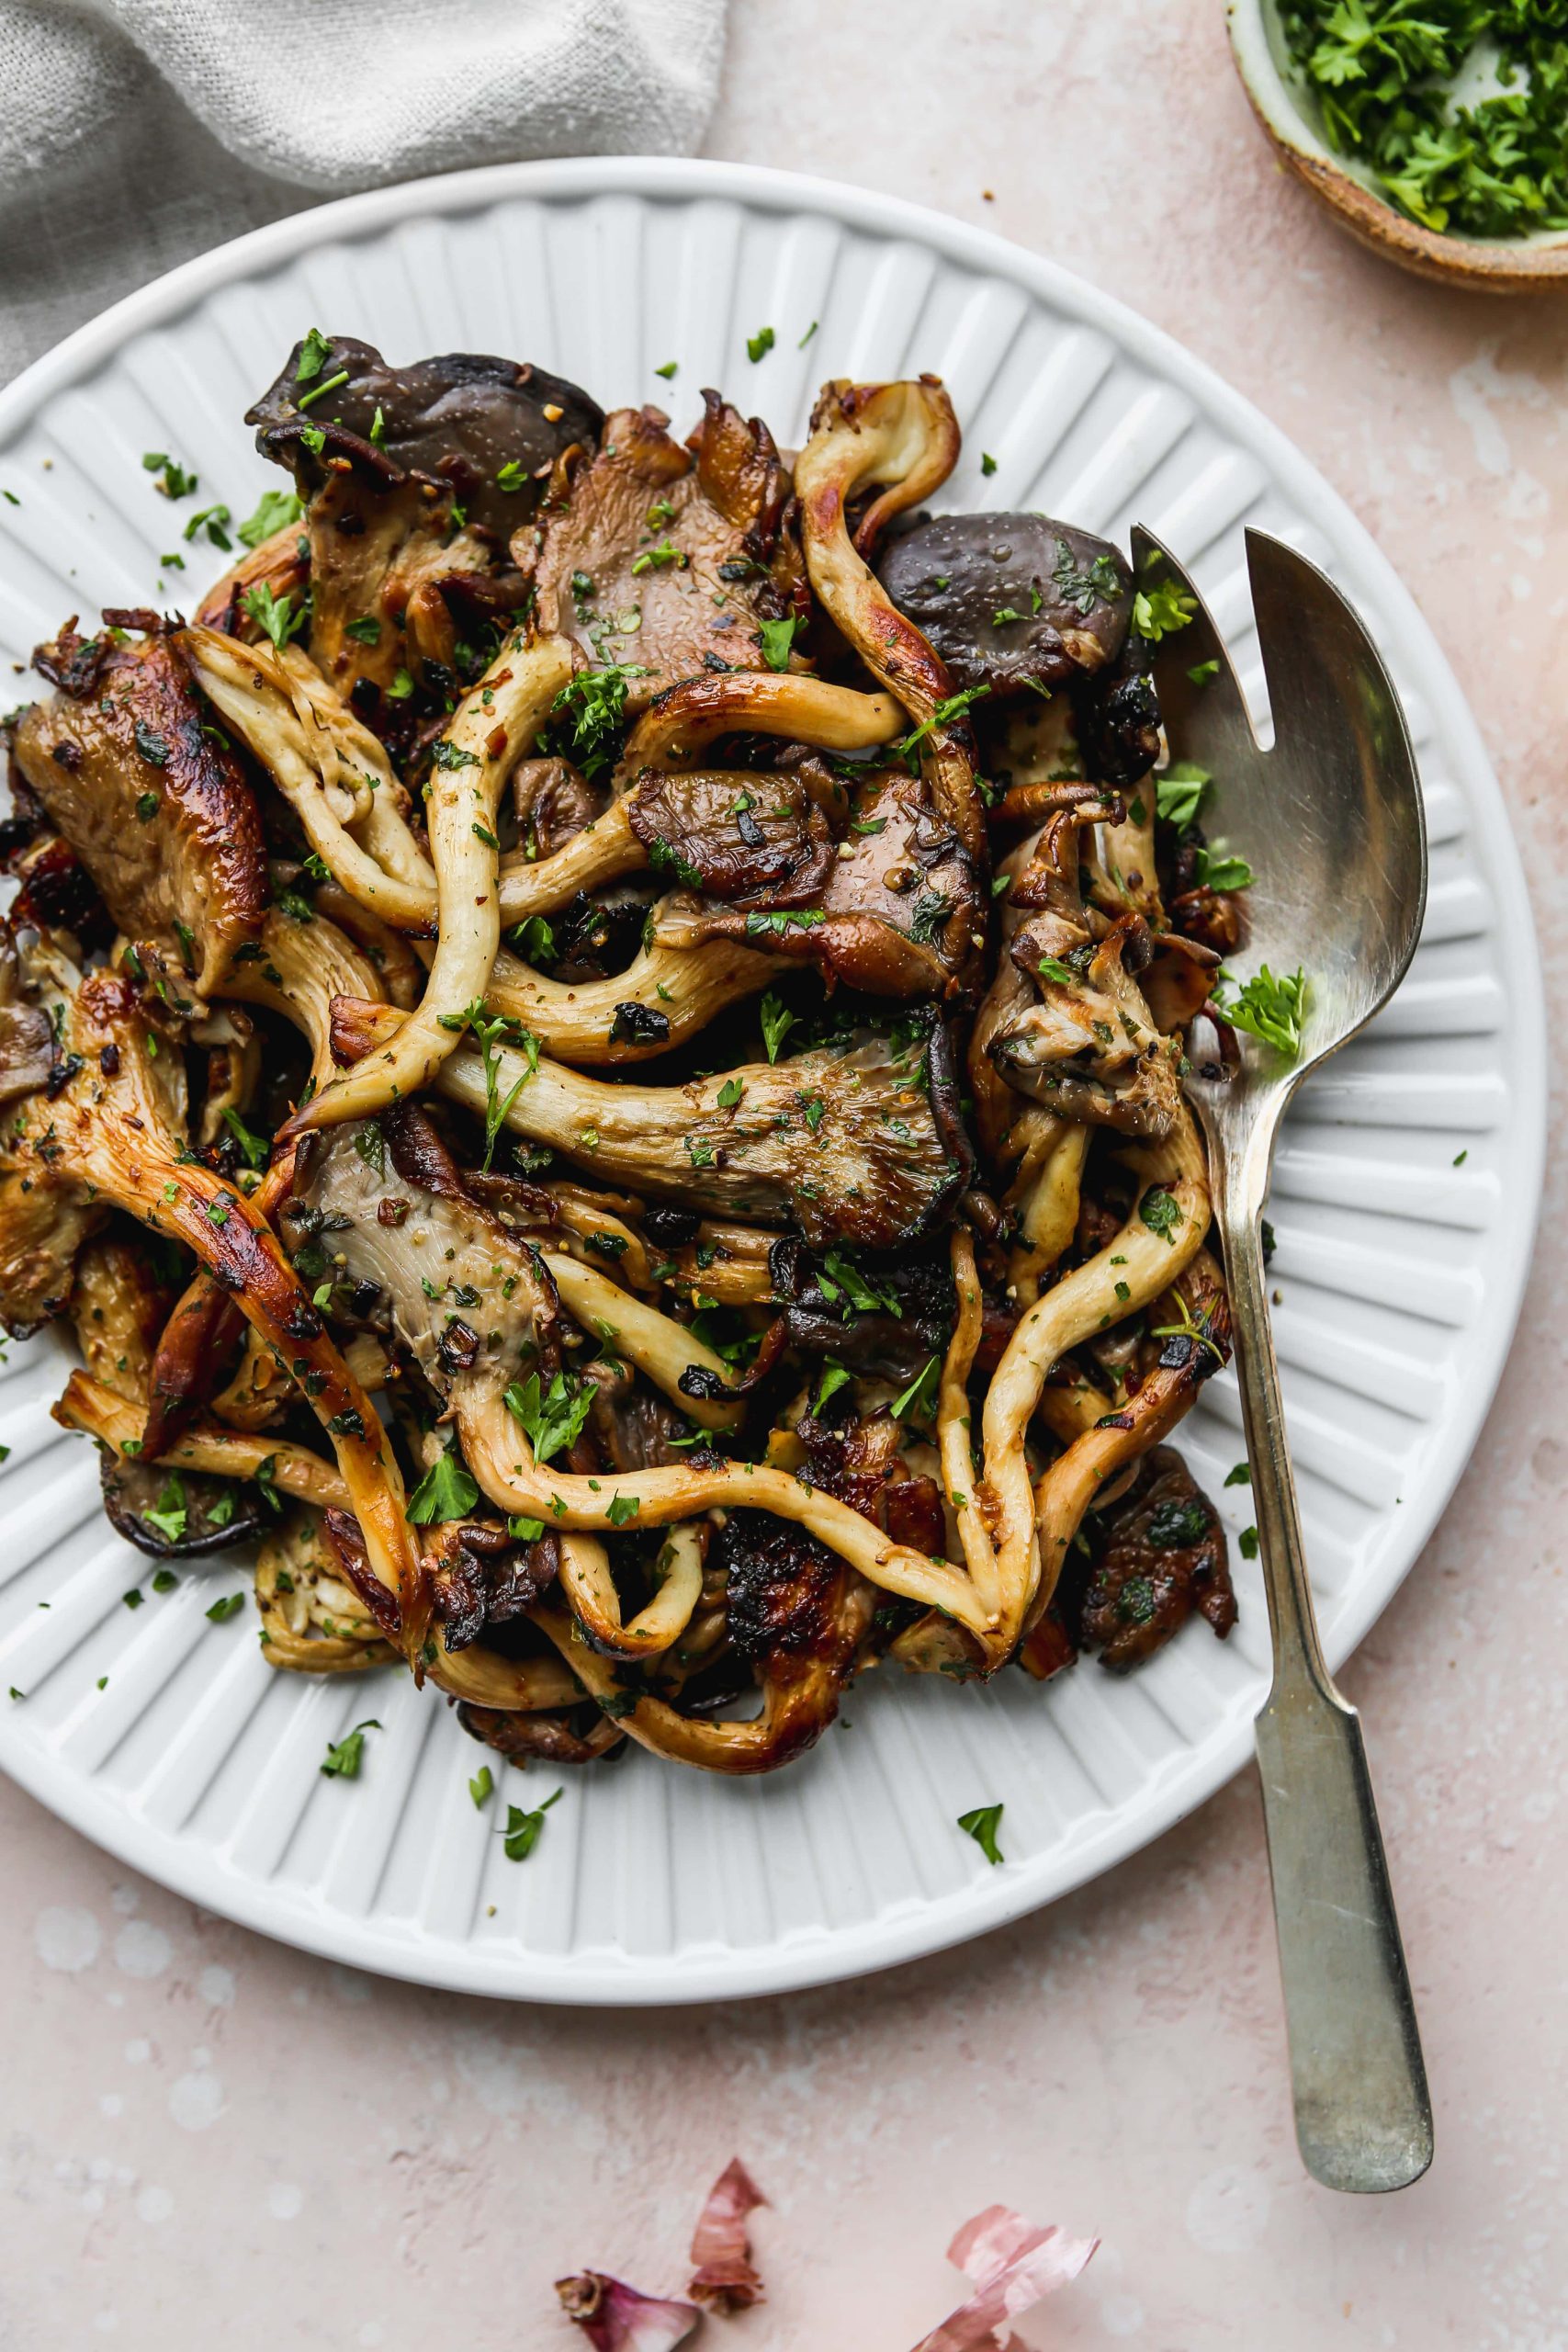 Oyster Mushrooms: A Delicious and Nutritious Side Dish